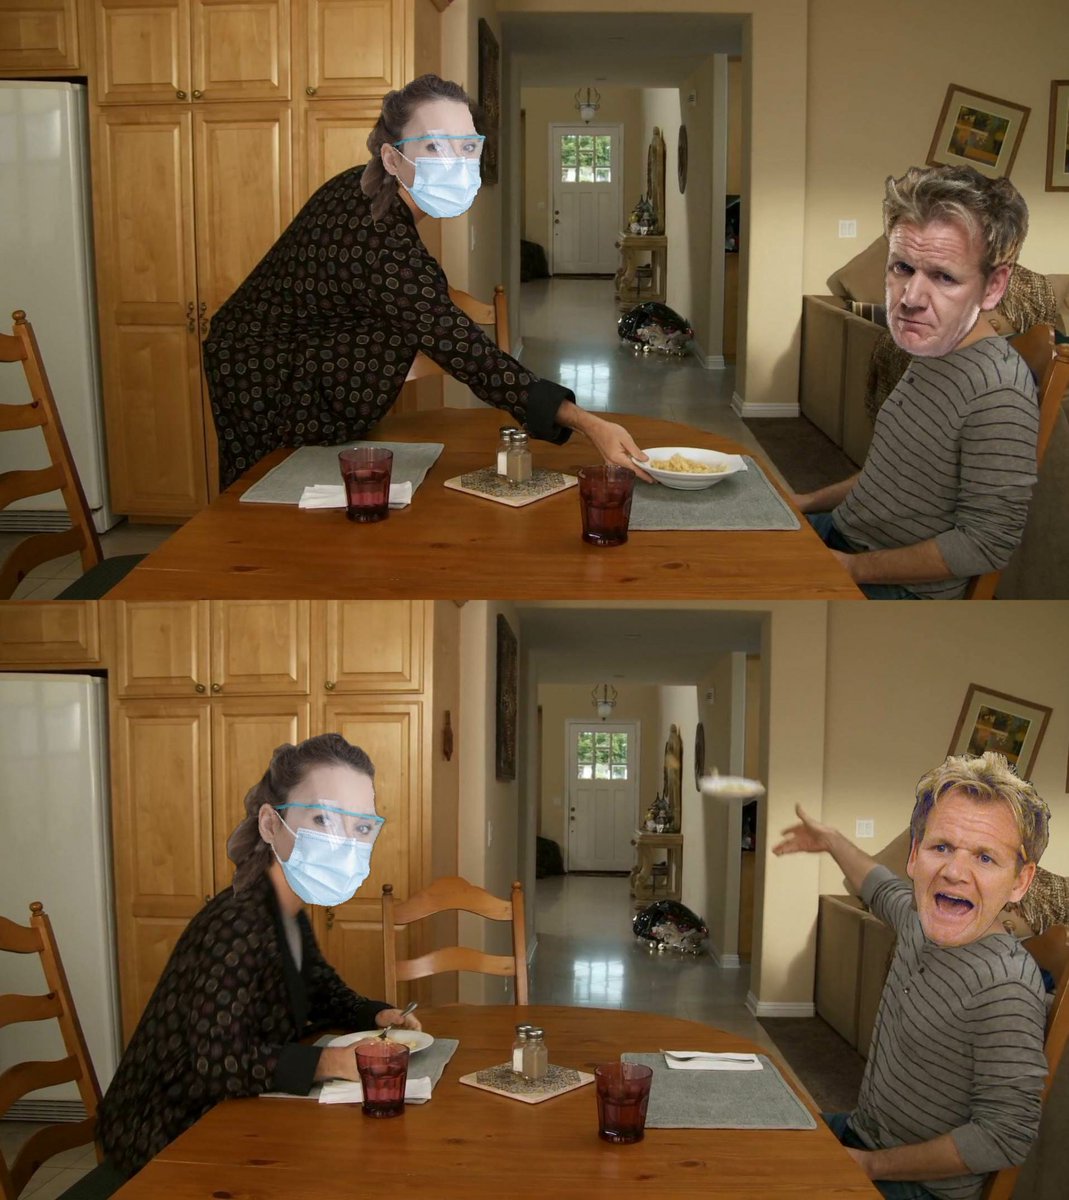 #Memes 
Gordon Ramsay at the hospital (meal time) https://t.co/f3IidlImJj